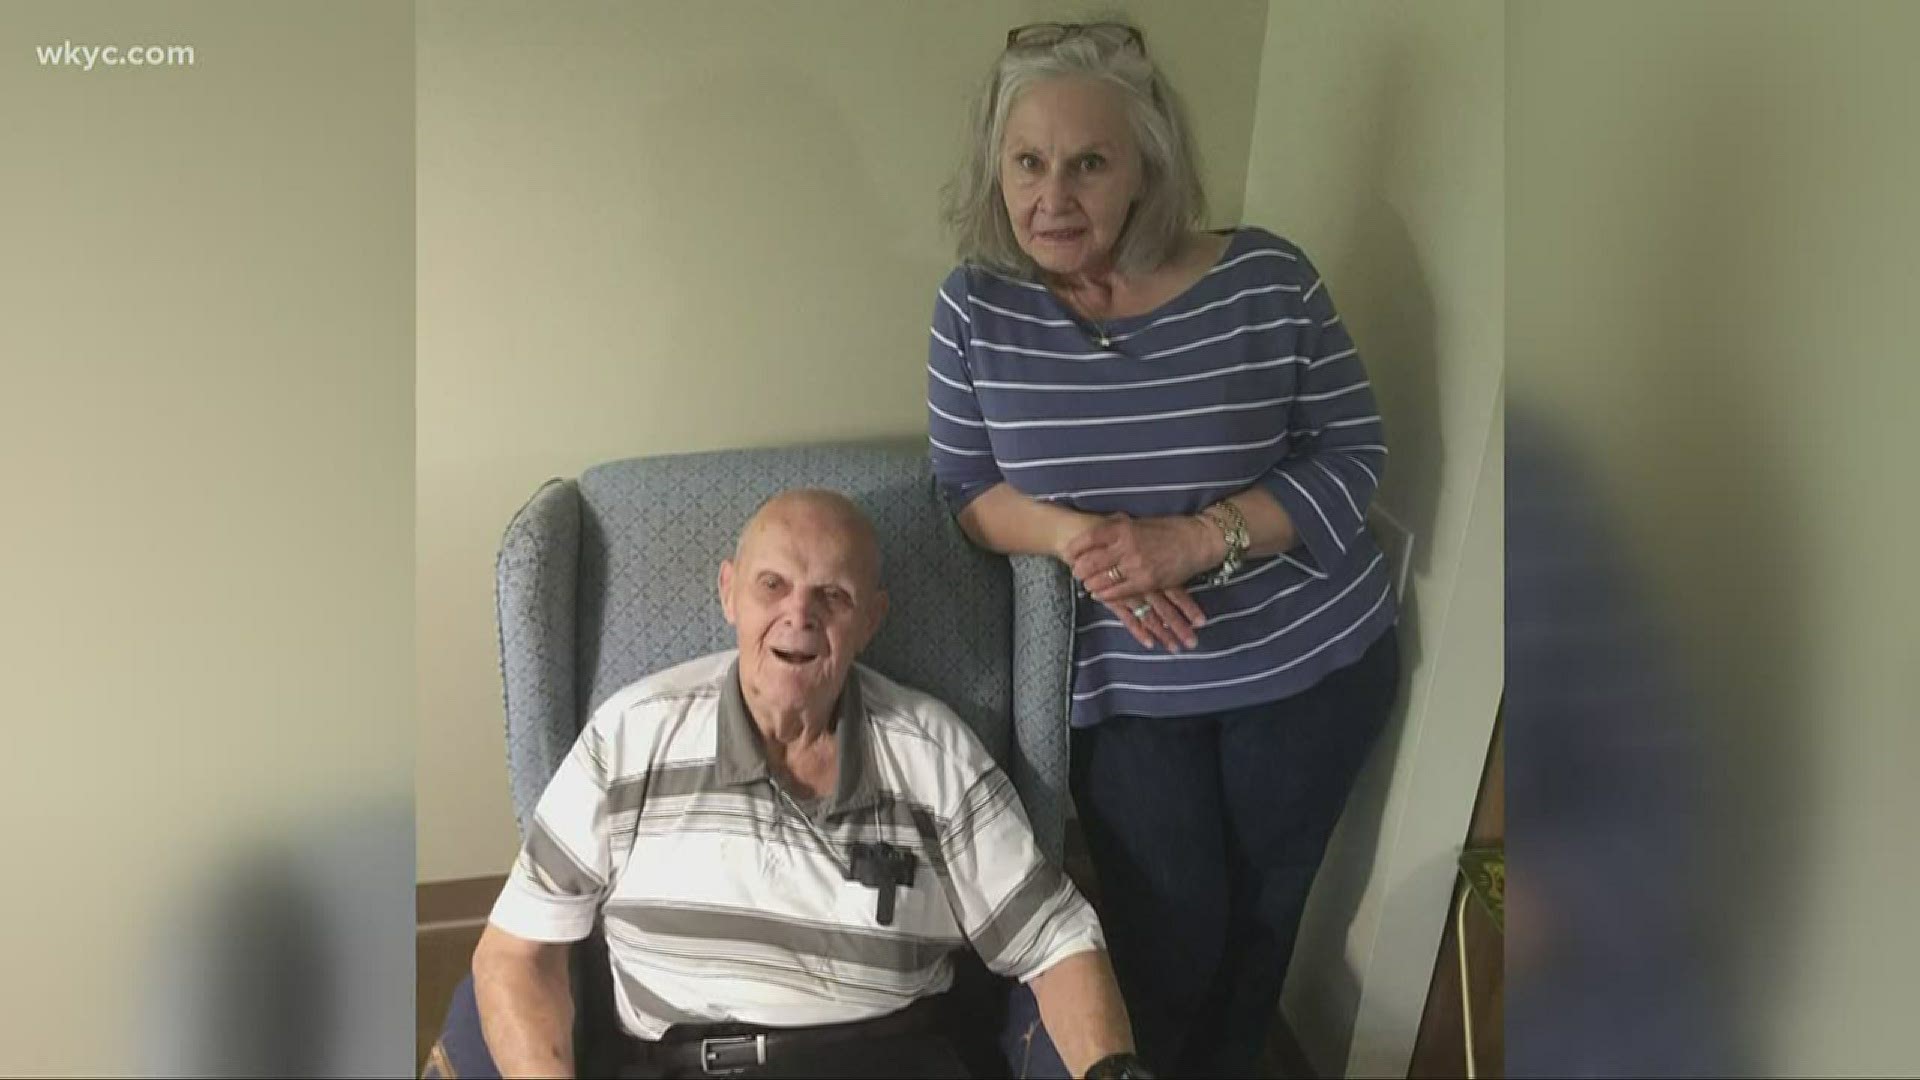 Al Keeling has seen a lot in his century on this earth. Betsy Kling helps to reunite him with his daughter, who have spent weeks apart during coronavirus lockdowns.